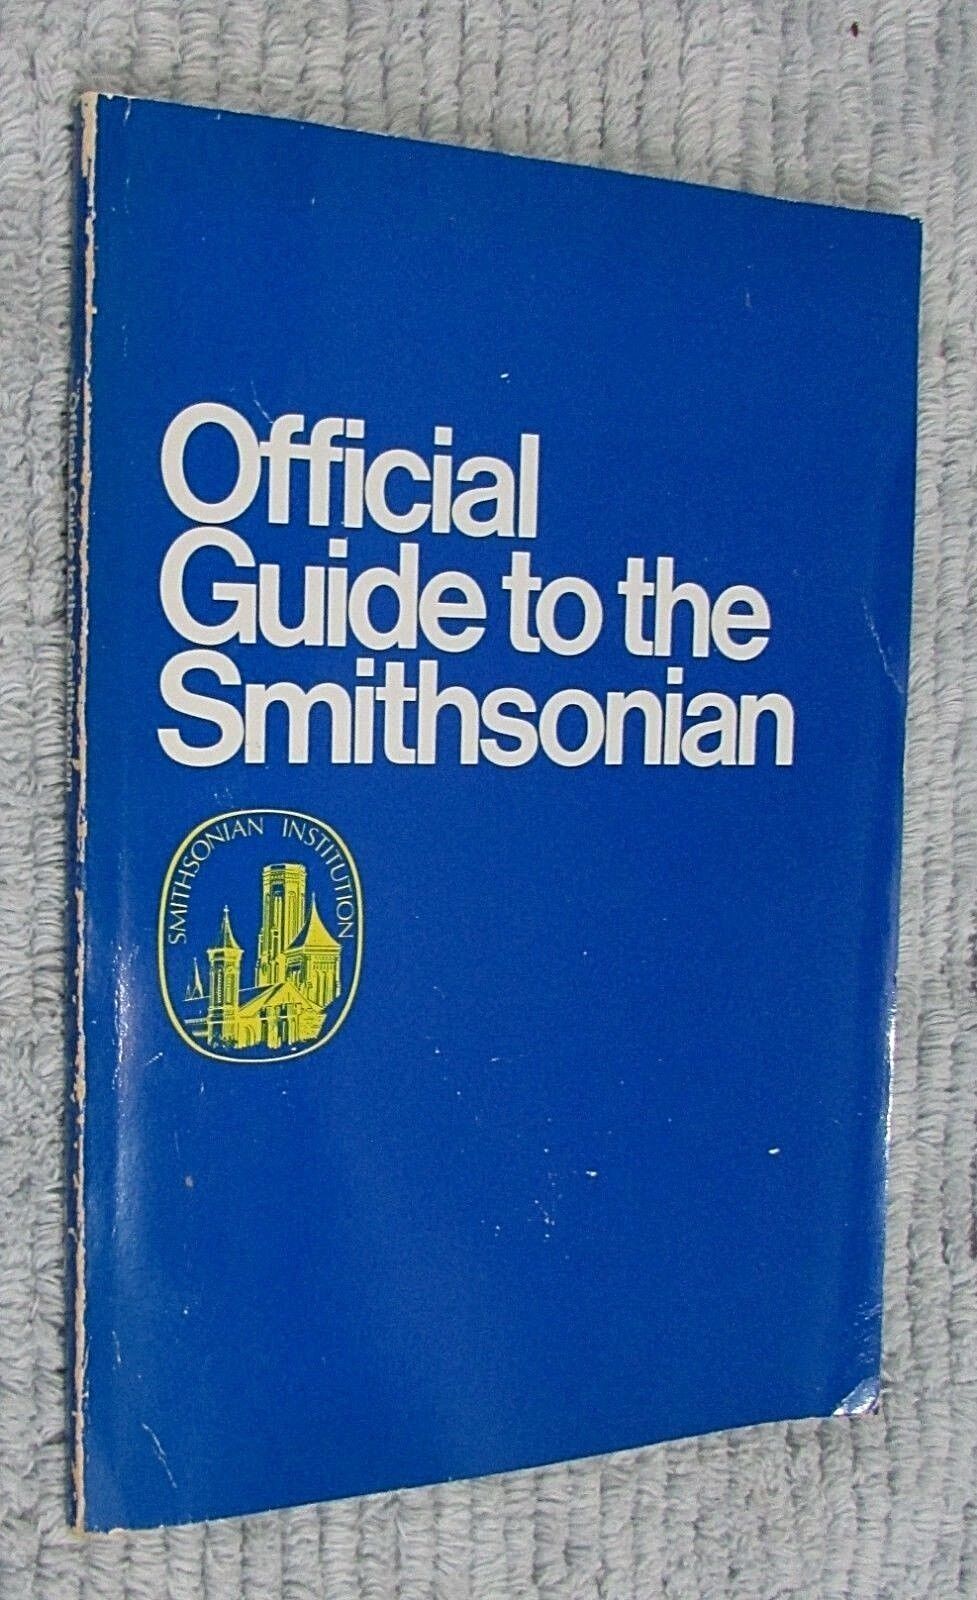 Old 1976 Official Guide To The Smithsonian Institution Vintage 144 Page pb Book